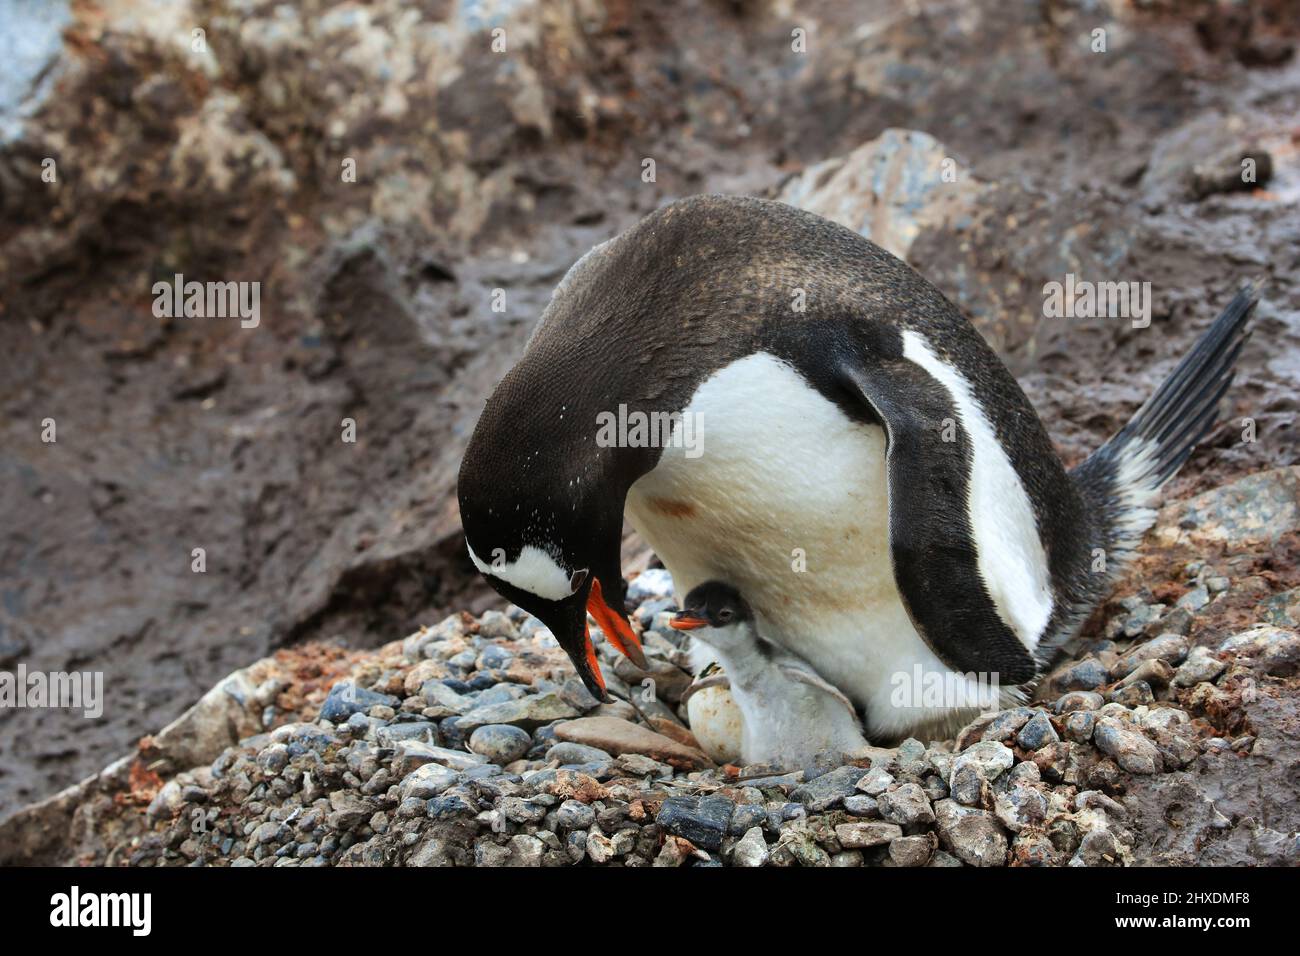 Gentoo penguin and chick at the González Videla Antarctic Base. A second chick is just hatching from the partially broken shell. Stock Photo